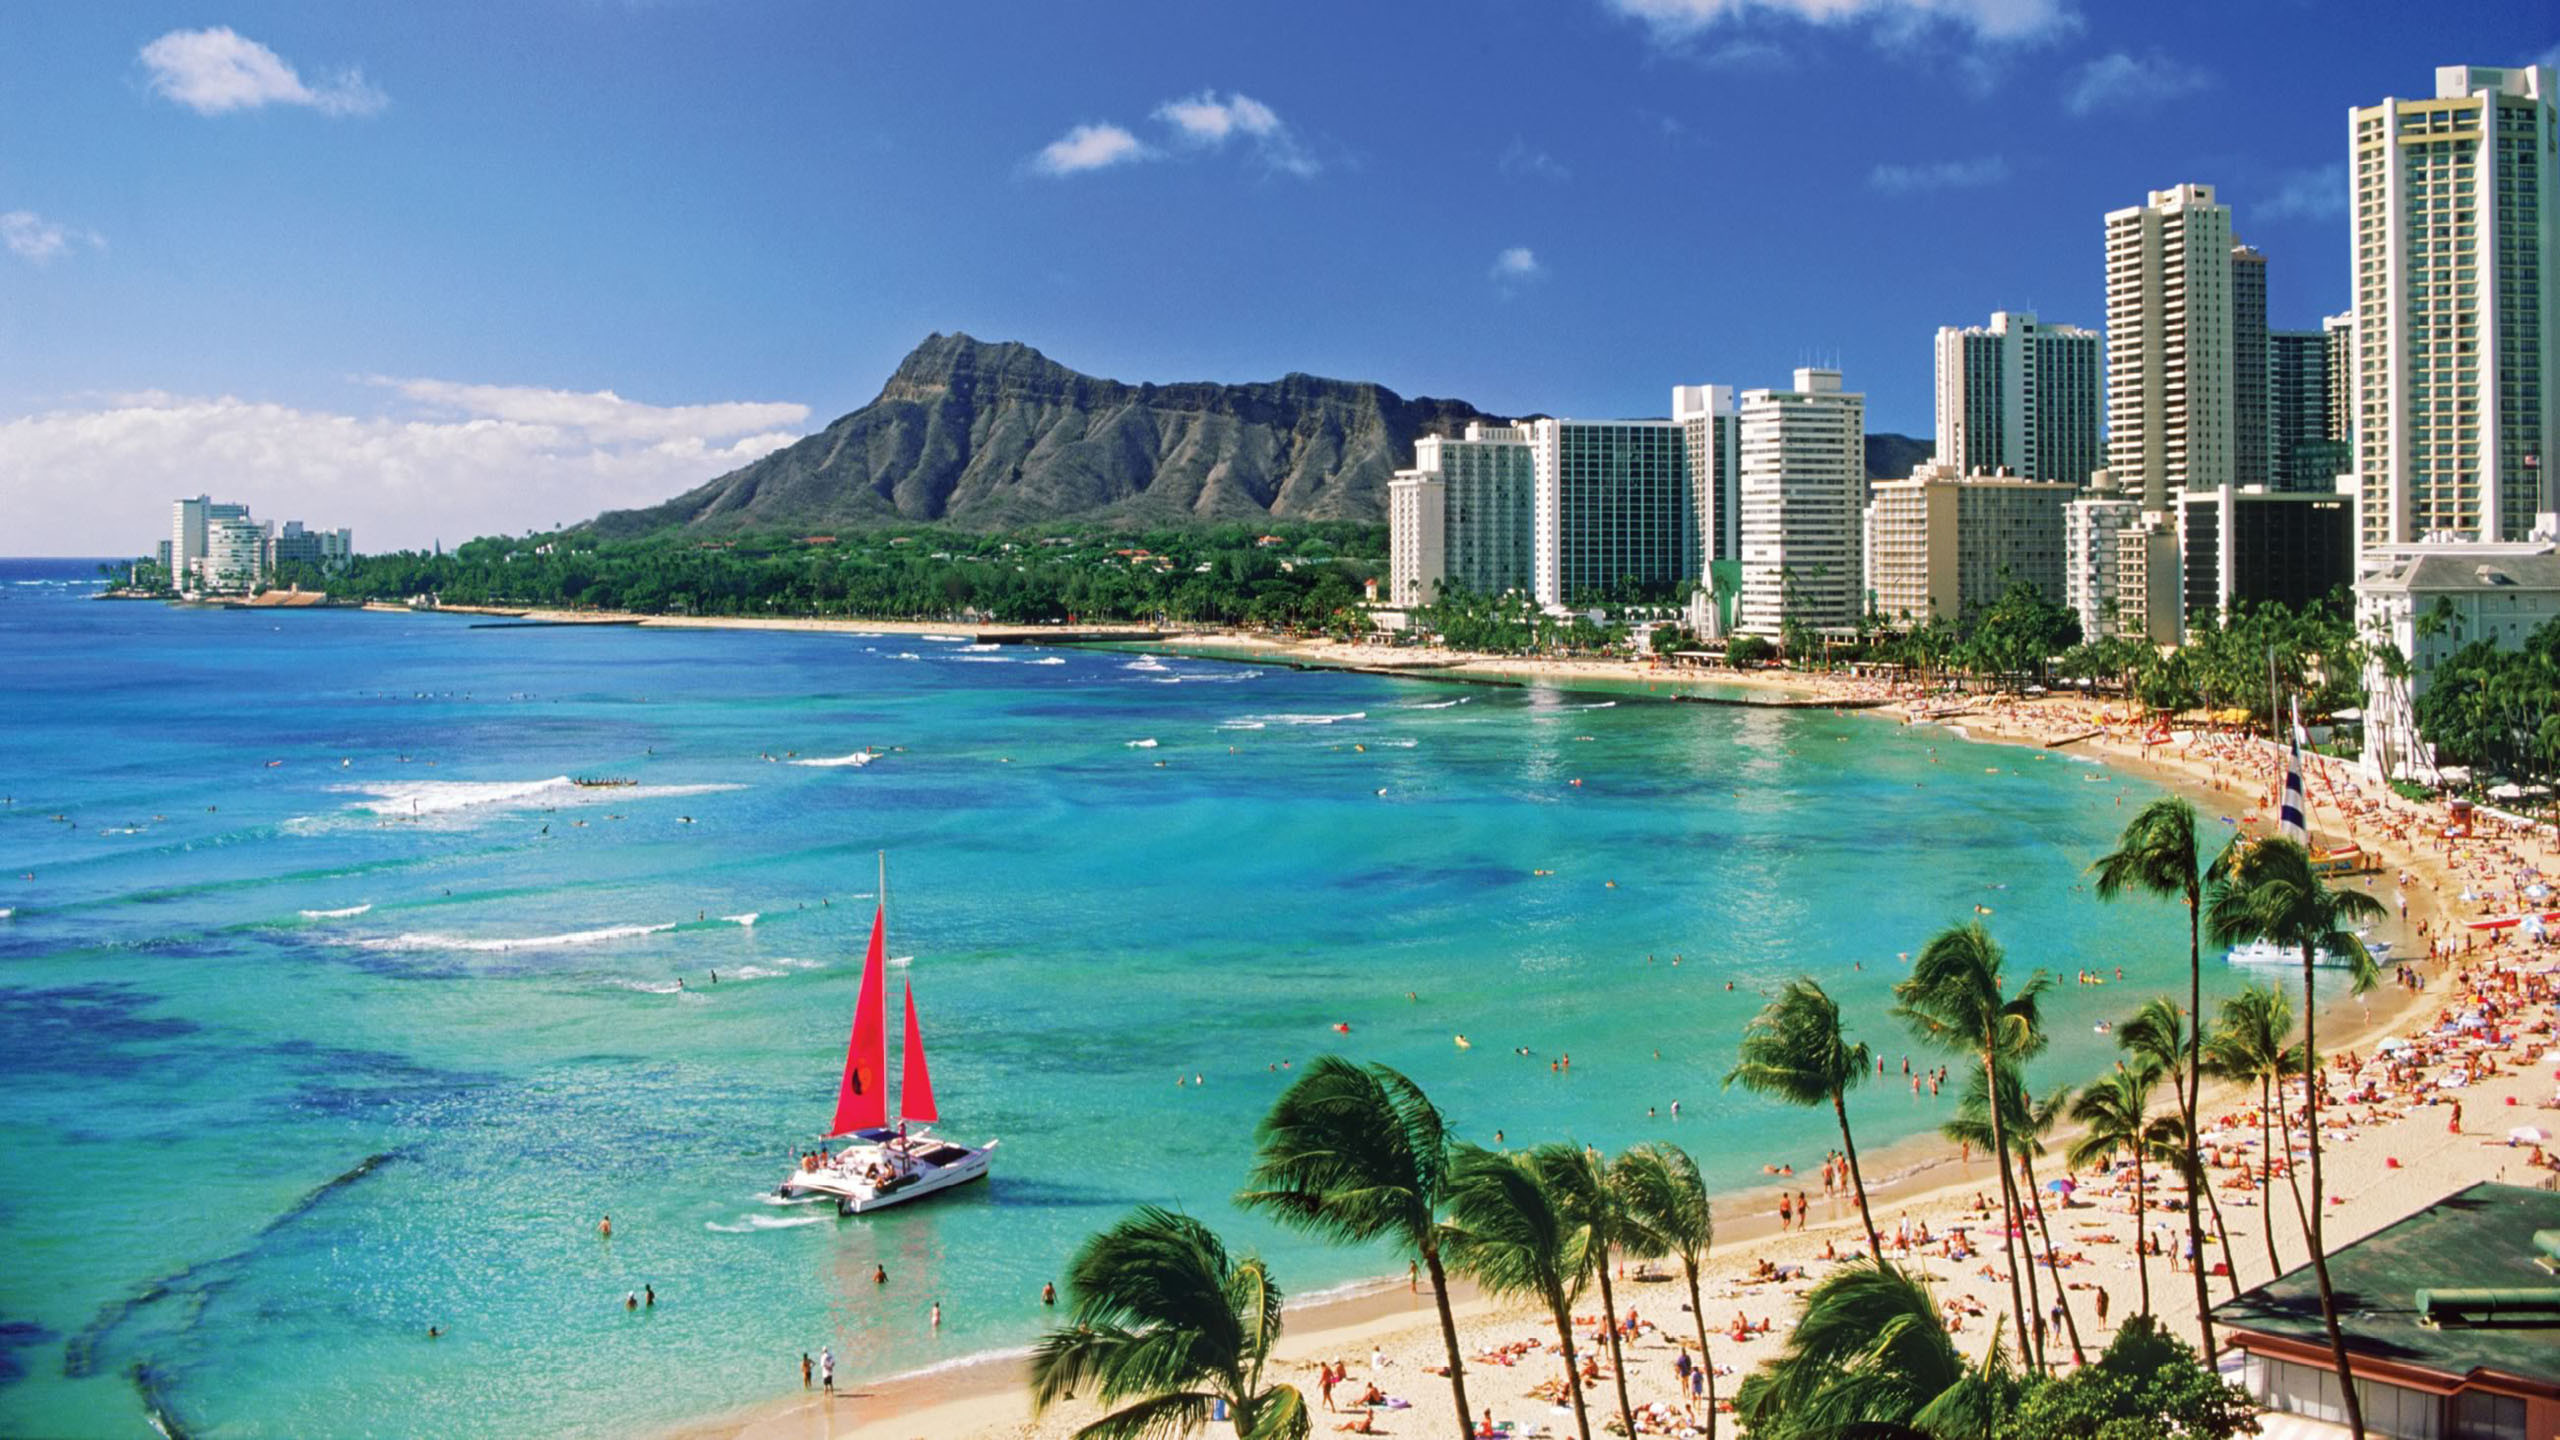 2560x1440 Hawaii wallpapers, Stunning backgrounds, High definition images, Vibrant colors, 2560x1440 HD Desktop